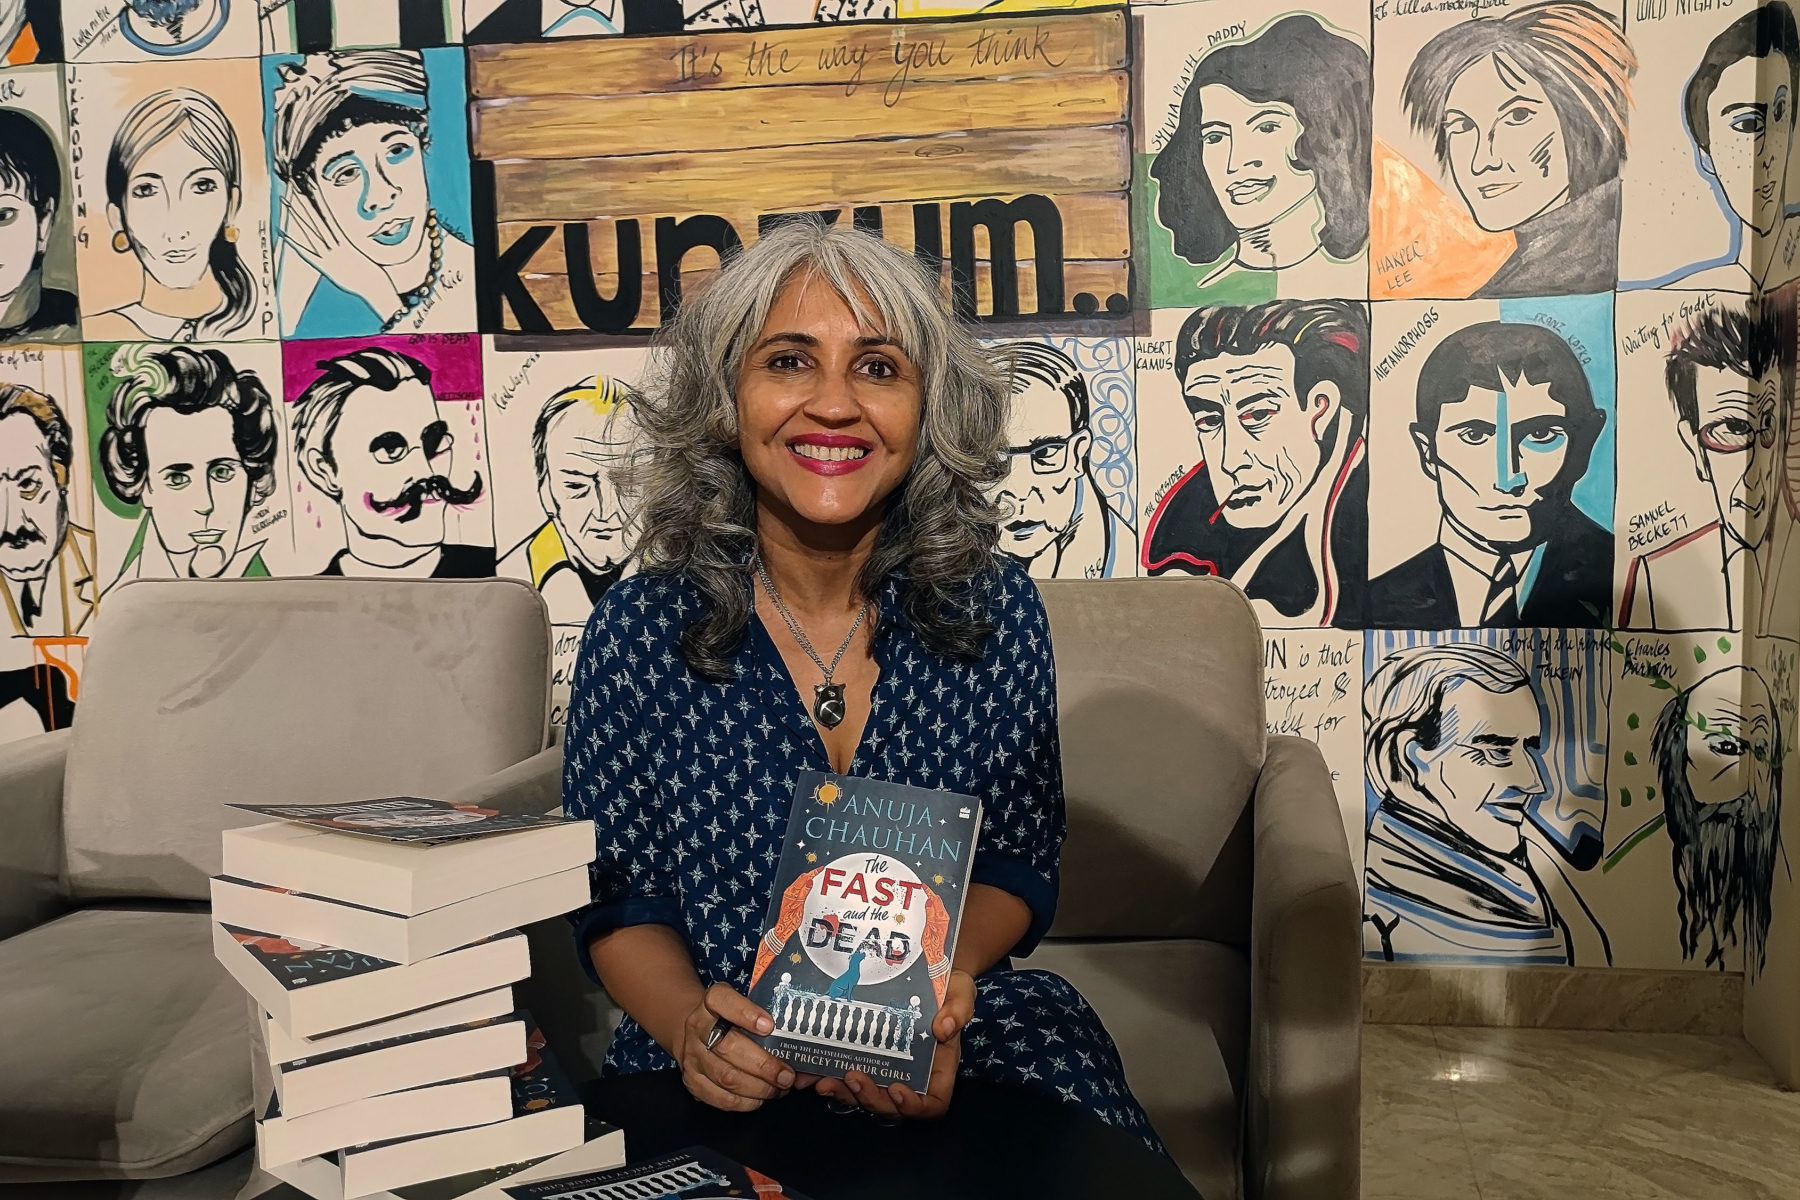 Interview: I Write Humour and Social Commentary Based on Indian Society Masala, says Anuja Chauhan